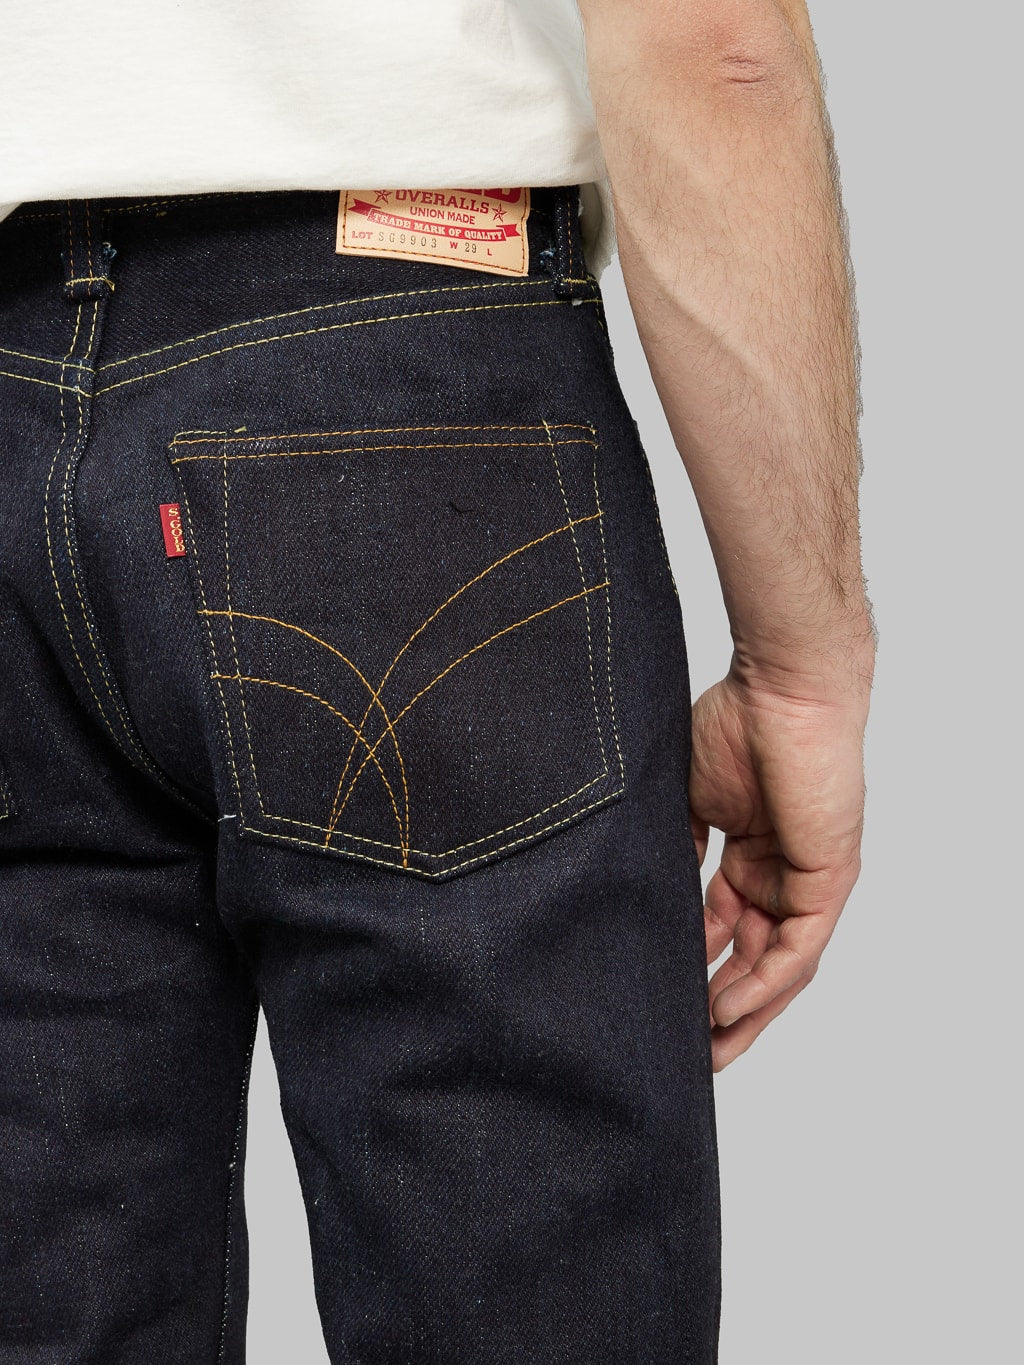 The Strike Gold Extra Heavyweight regular straight jeans pocket details